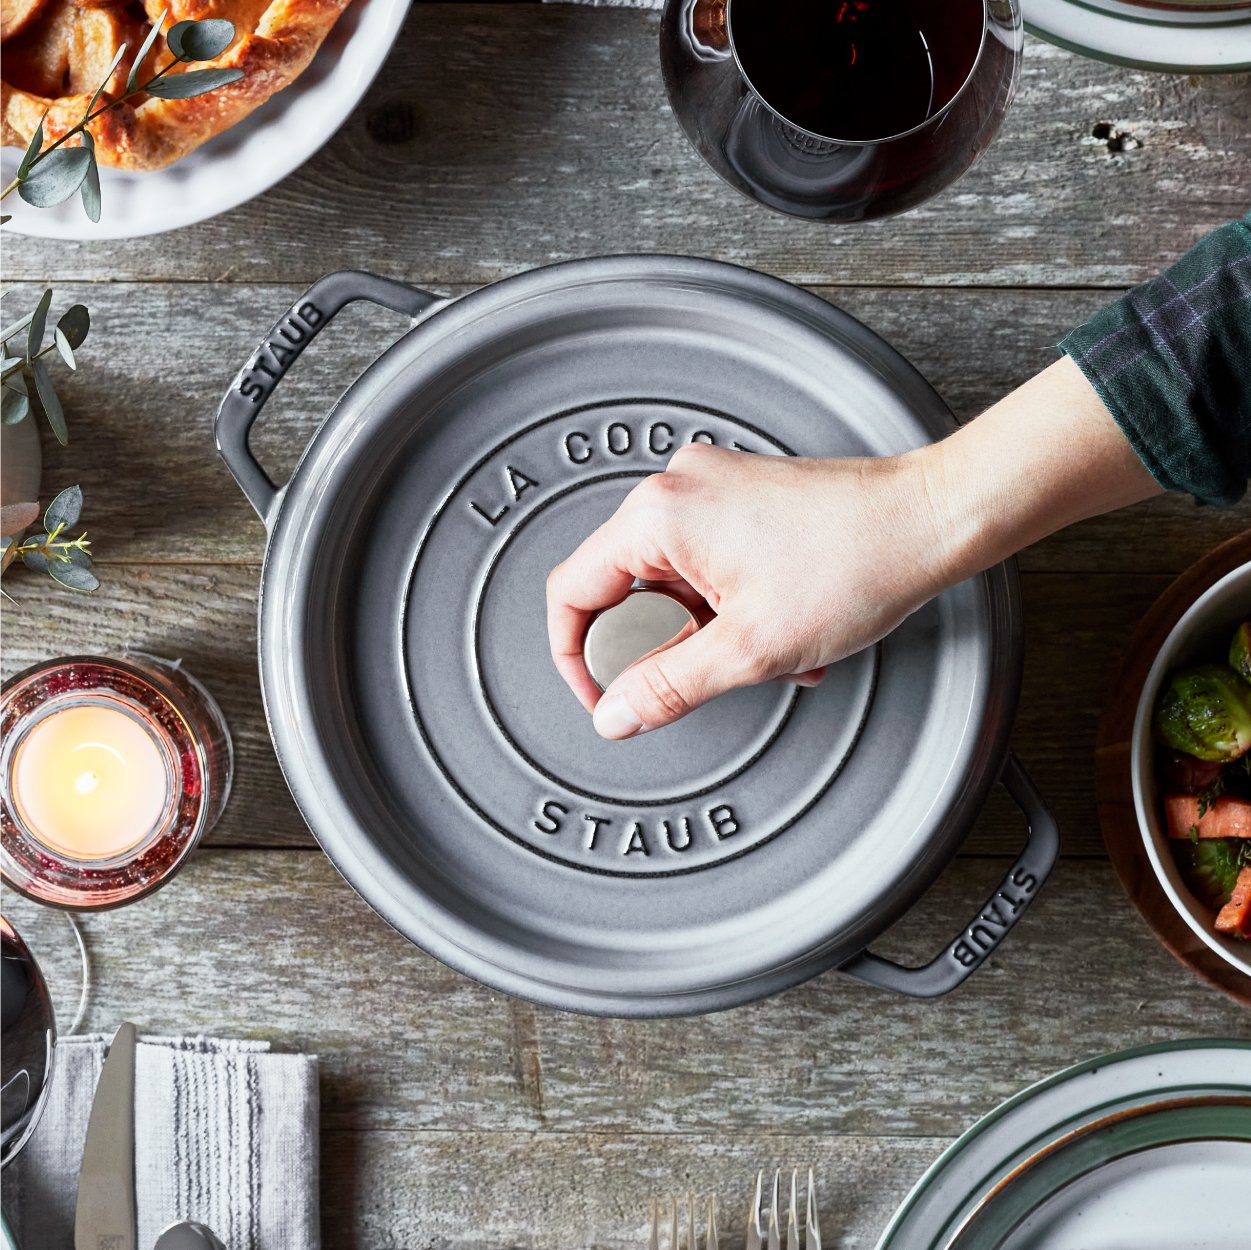 https://www.zwilling.com/on/demandware.static/-/Sites-zwilling-us-Library/default/dw3f7ccad5/images/product-content/masonry-content/staub/cast-iron/cocotte/Cocottes_Mason_Comp_600-600_RoundCocotte_3.jpg